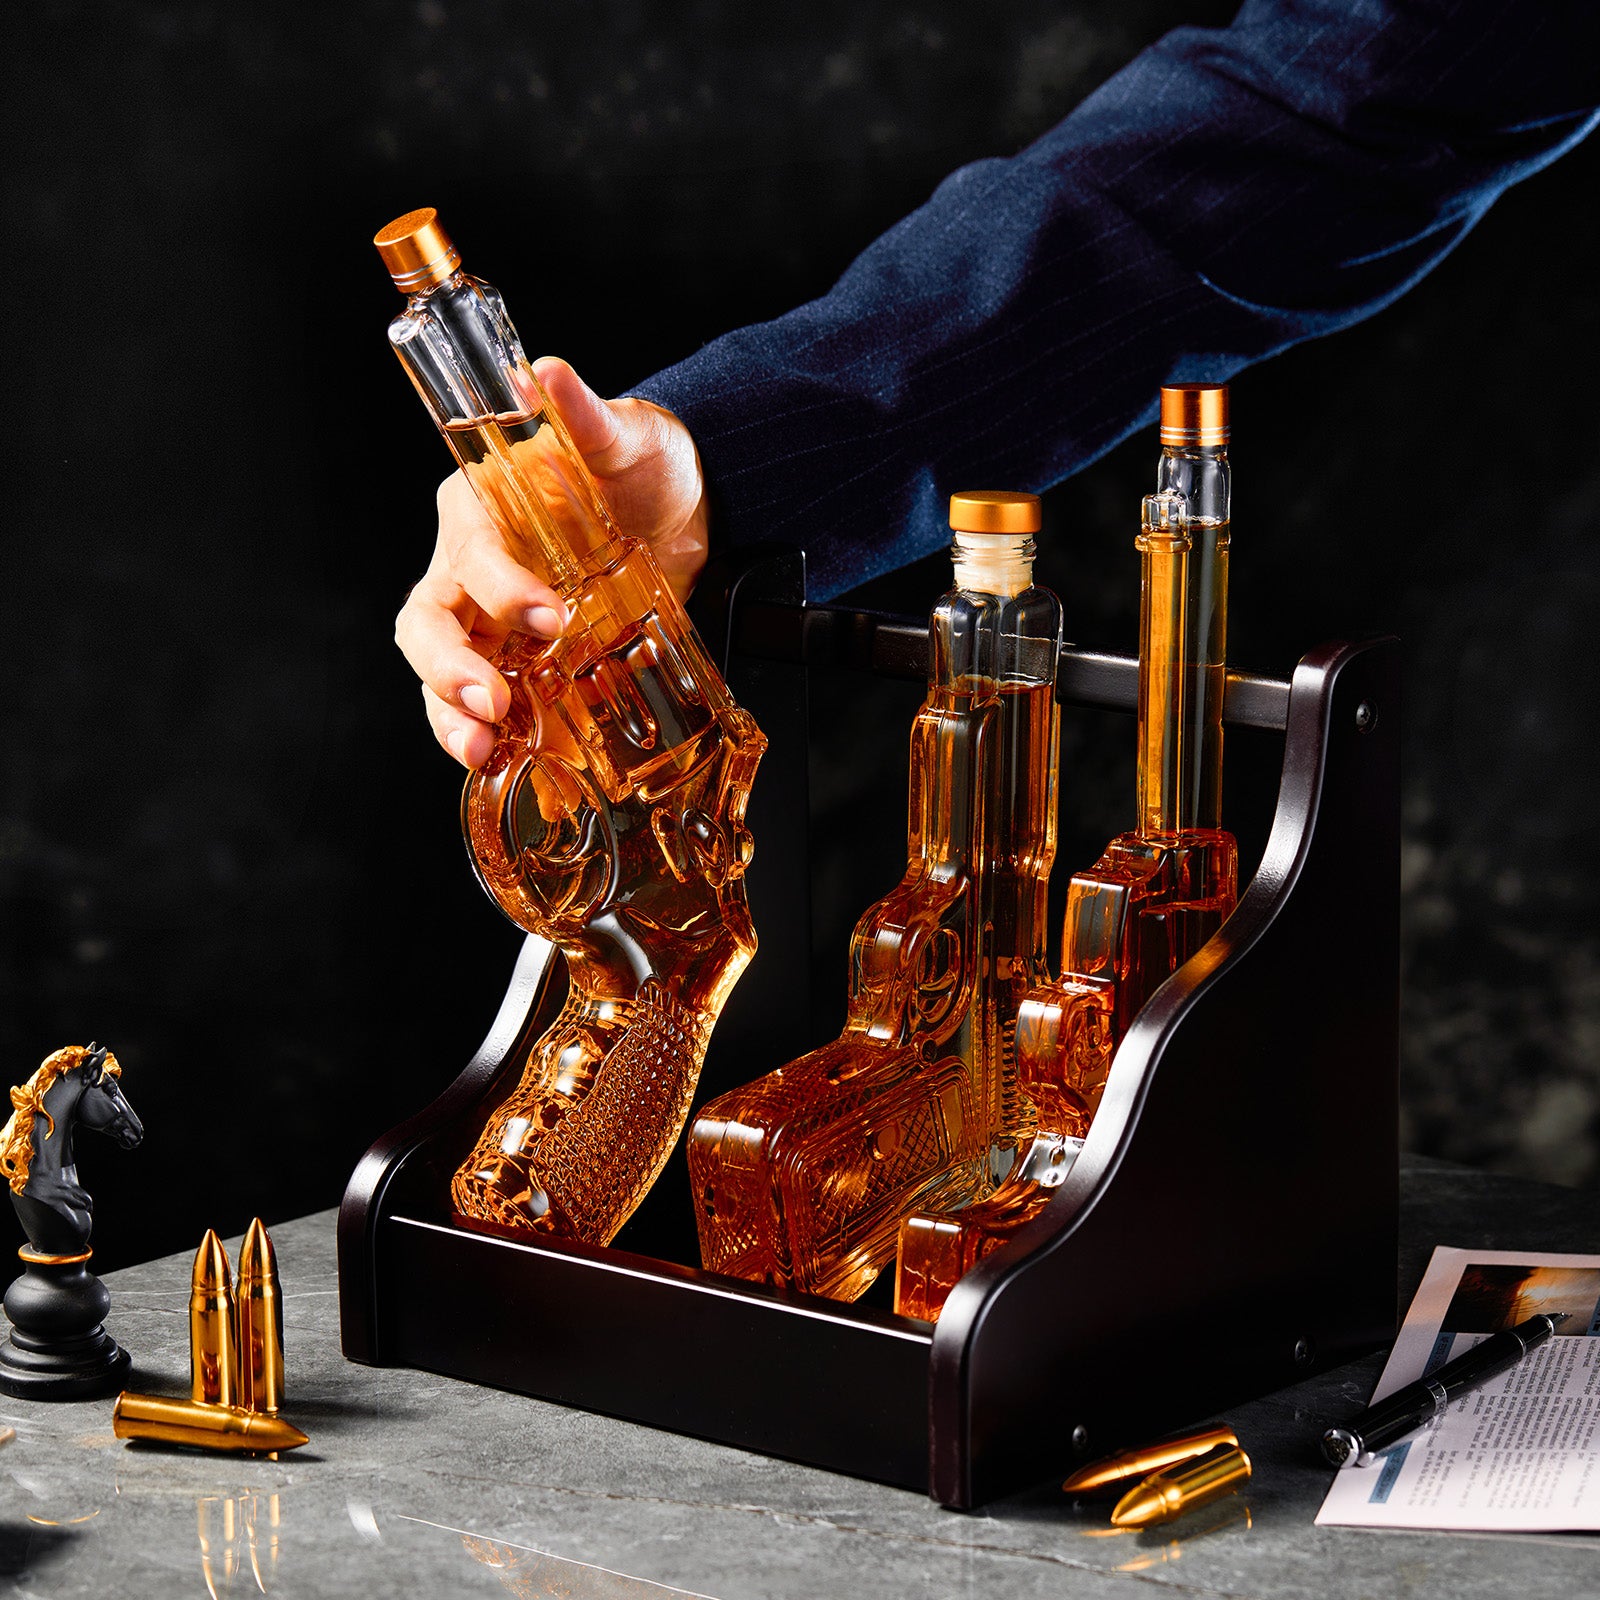 Gifts for Men Dad Pistol Whiskey Gun Decanter Set & 6 Pistol  Glasses Set - Comes with A large Carrying Case - Parties Great Gift, Gifts  Men Dad, Whiskey Decanter